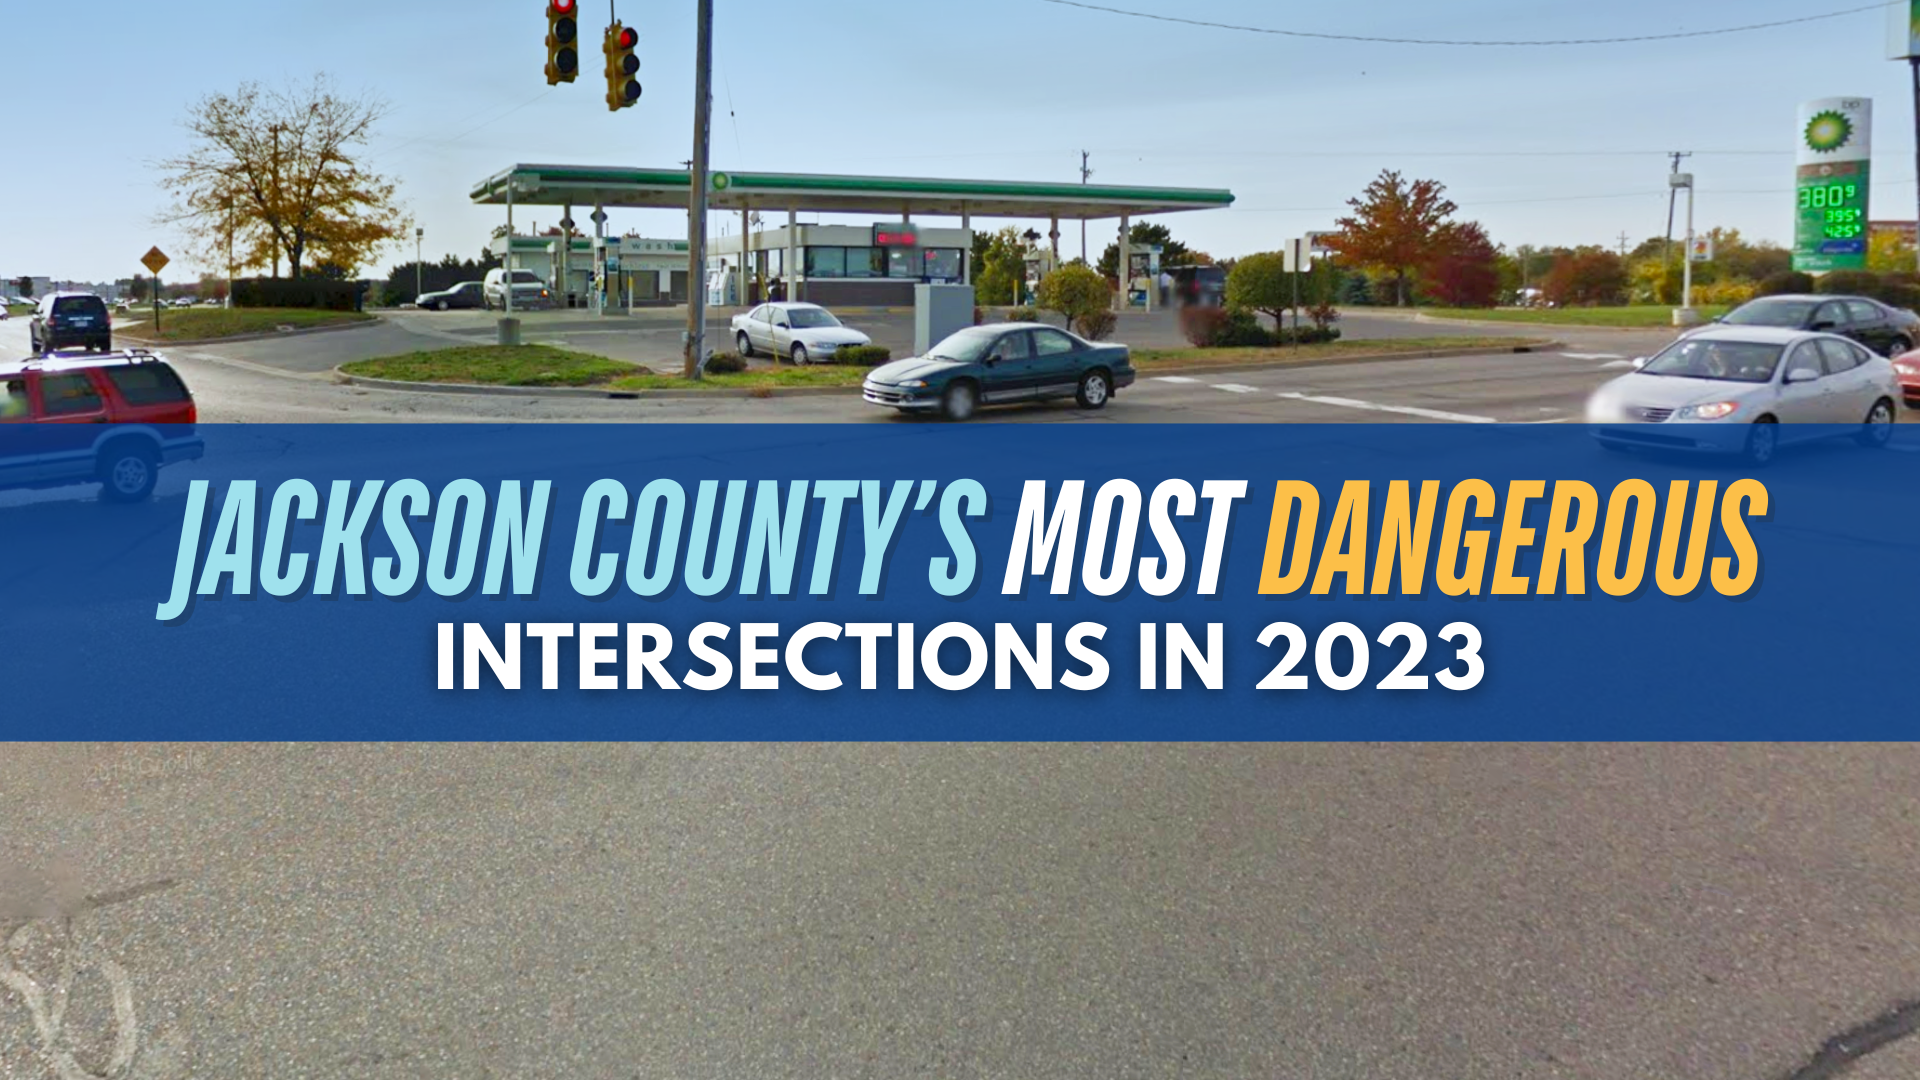 Jackson County's Most Dangerous Intersections of 2023